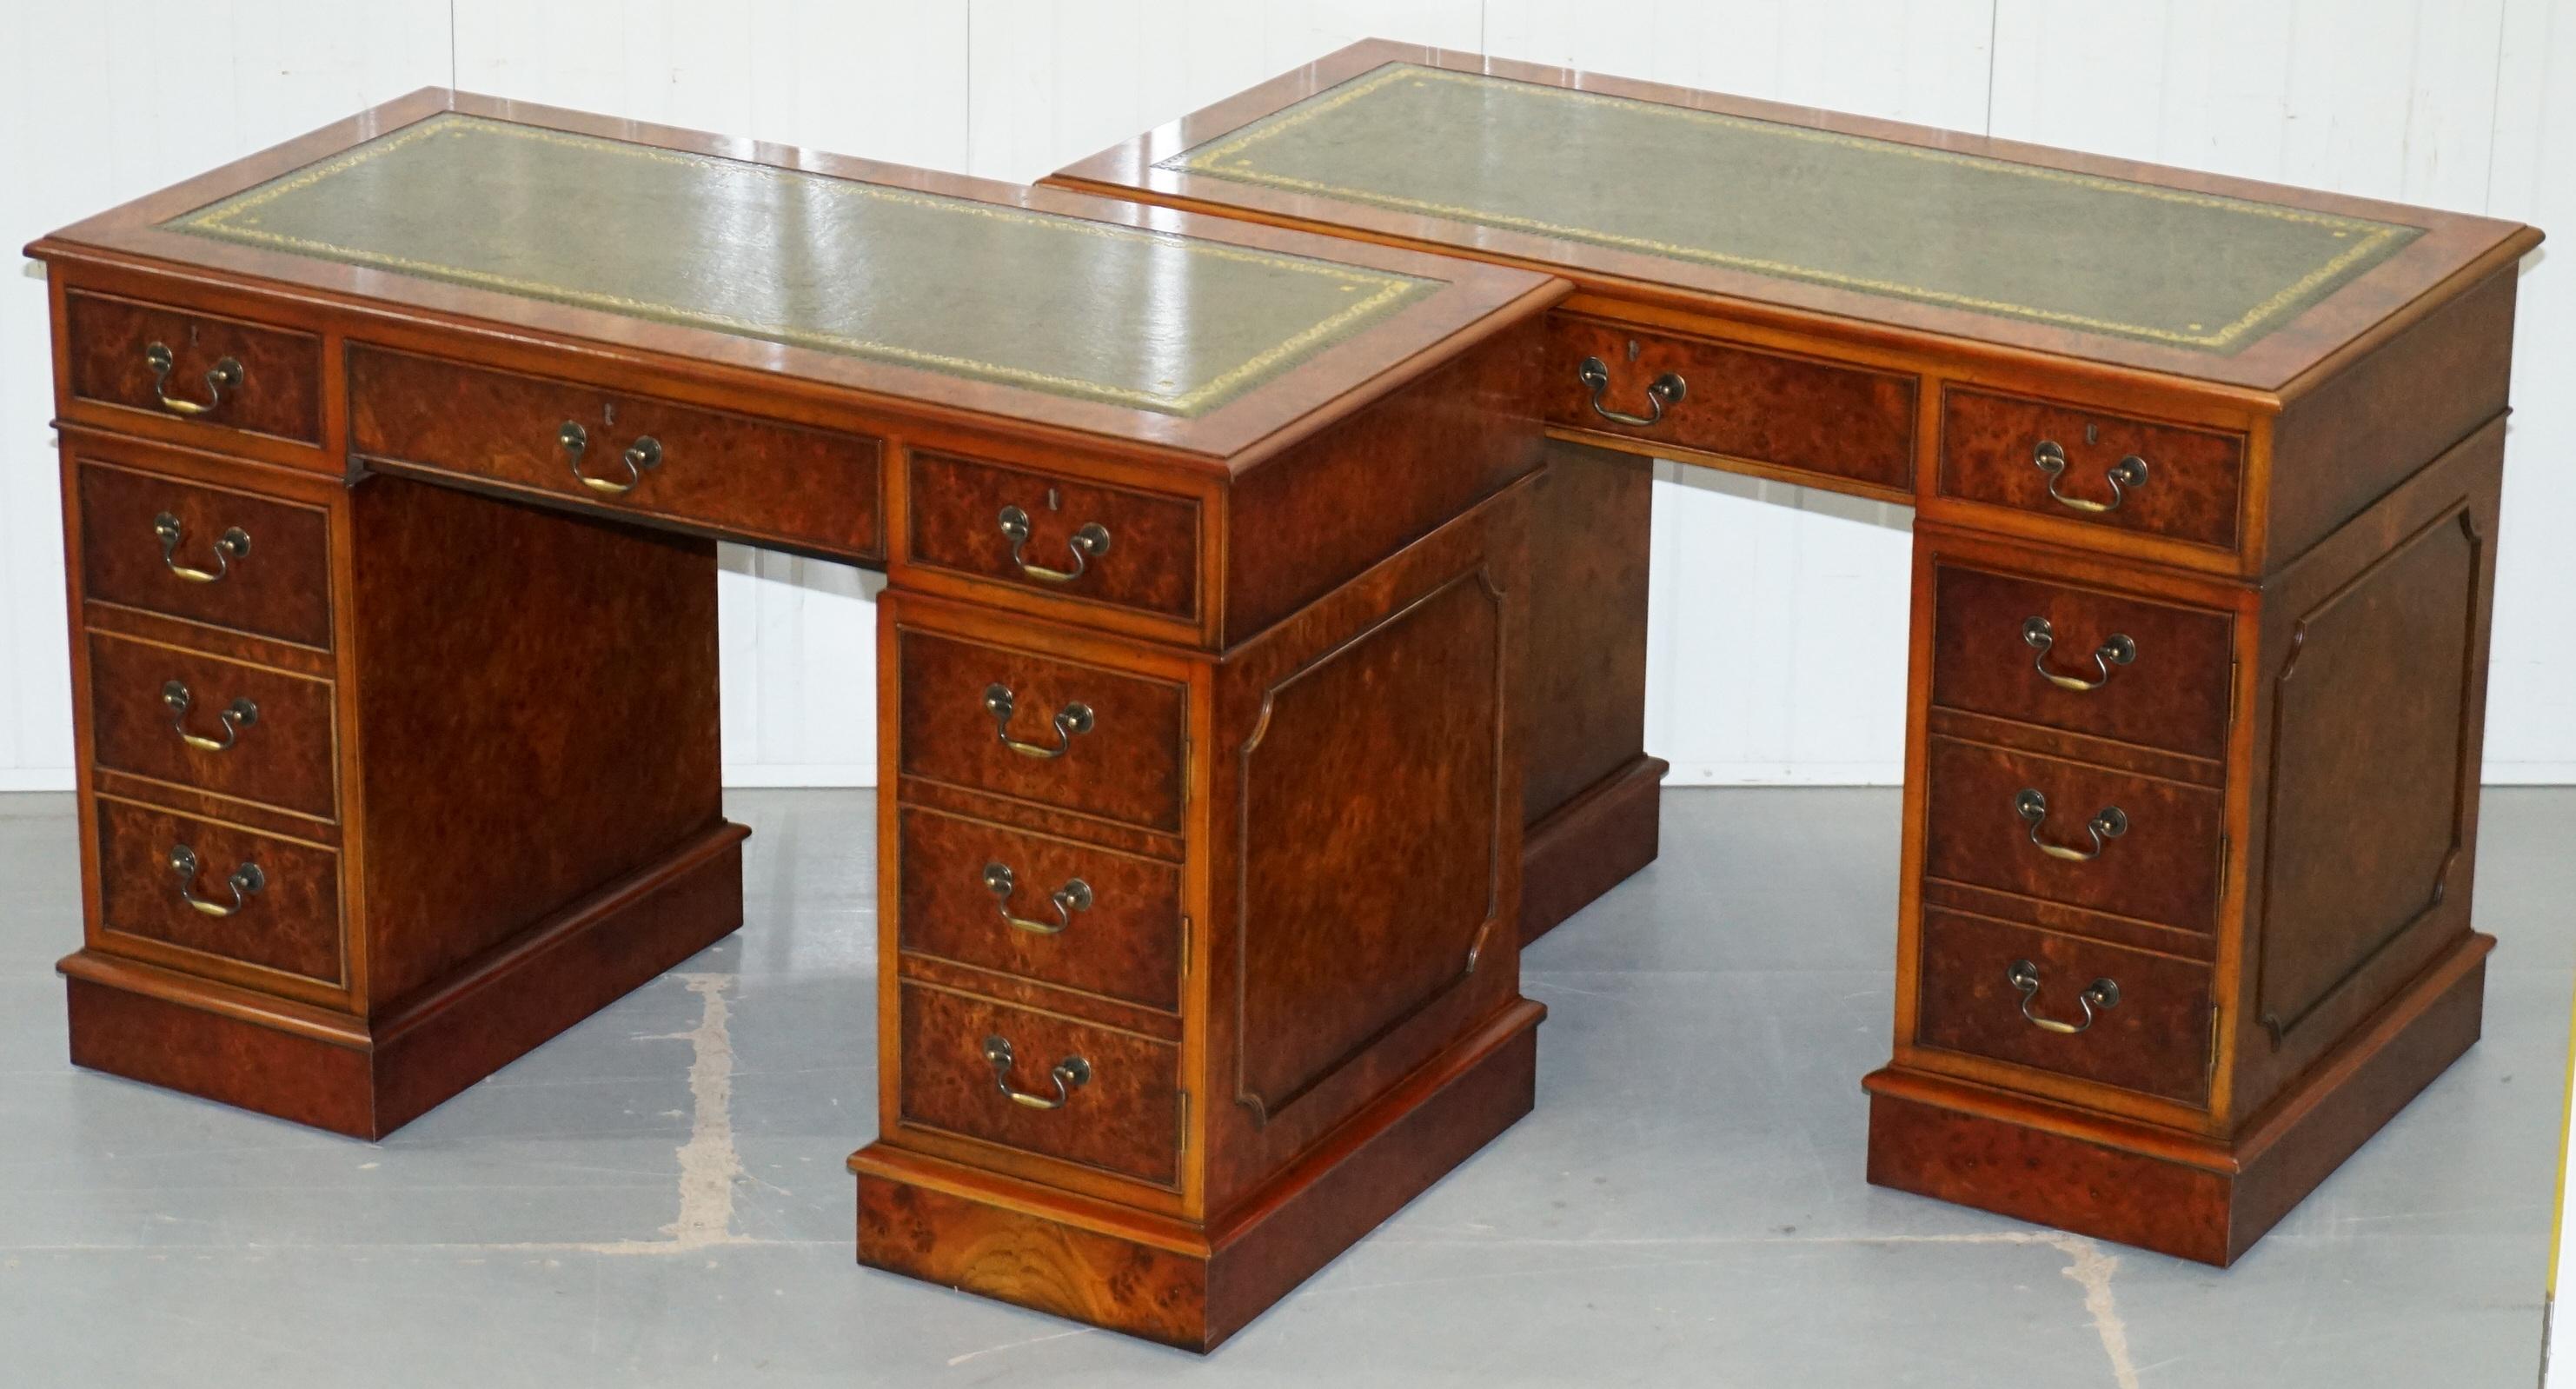 We are  delighted to offer for sale one of two stunning burr walnut twin pedestal partner desks specially designed to house a tower Computer

This auction is for one desk, the other is listed under my other items and not included in this sale

A